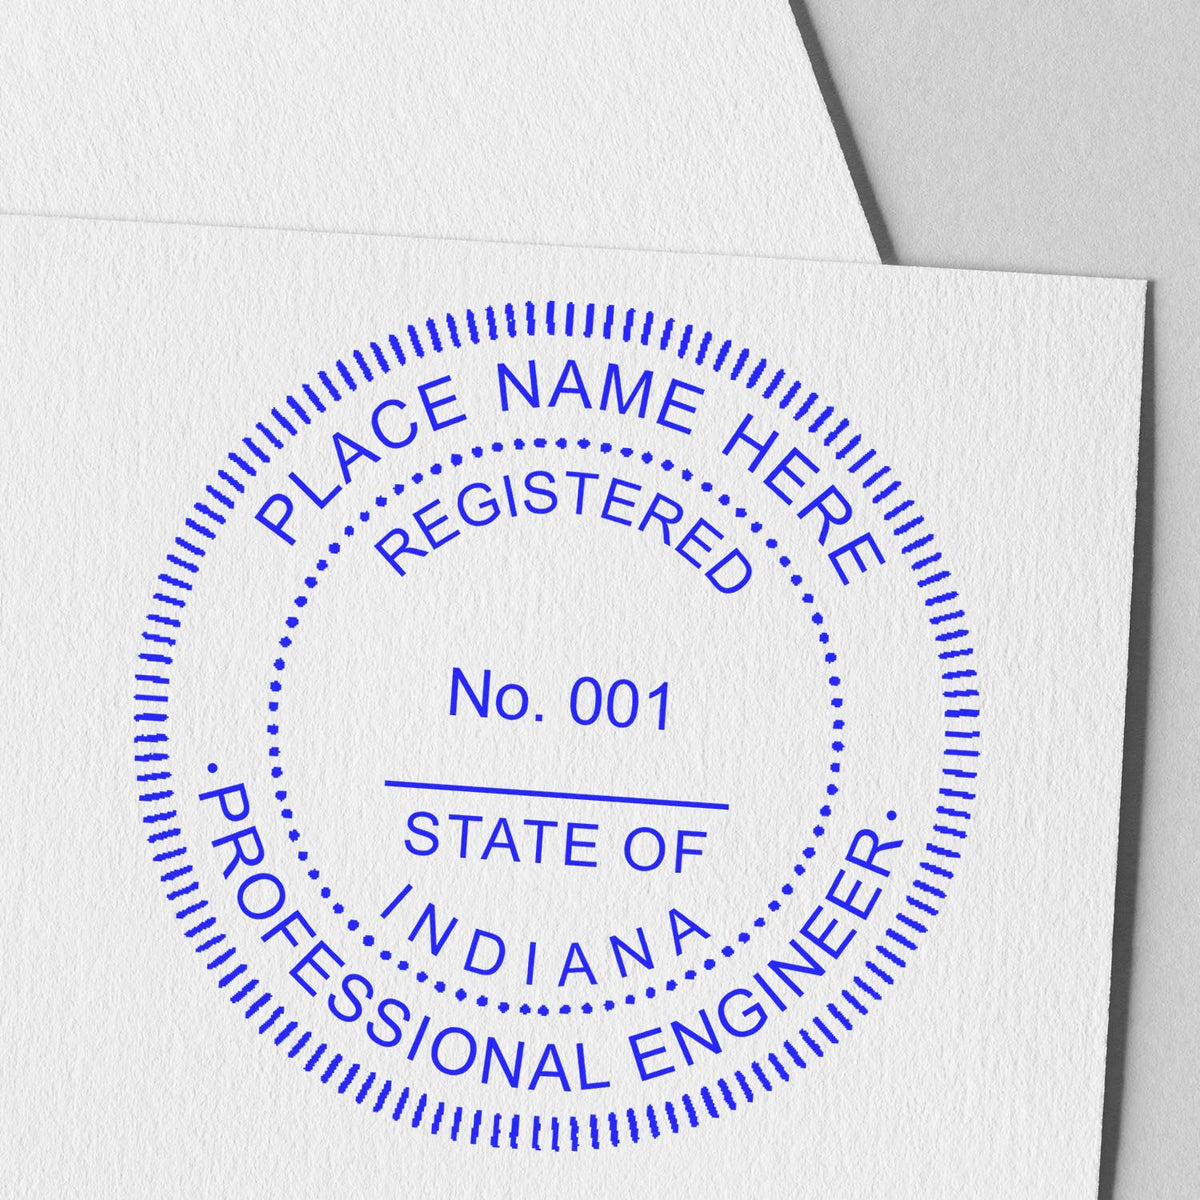 The Digital Indiana PE Stamp and Electronic Seal for Indiana Engineer stamp impression comes to life with a crisp, detailed photo on paper - showcasing true professional quality.